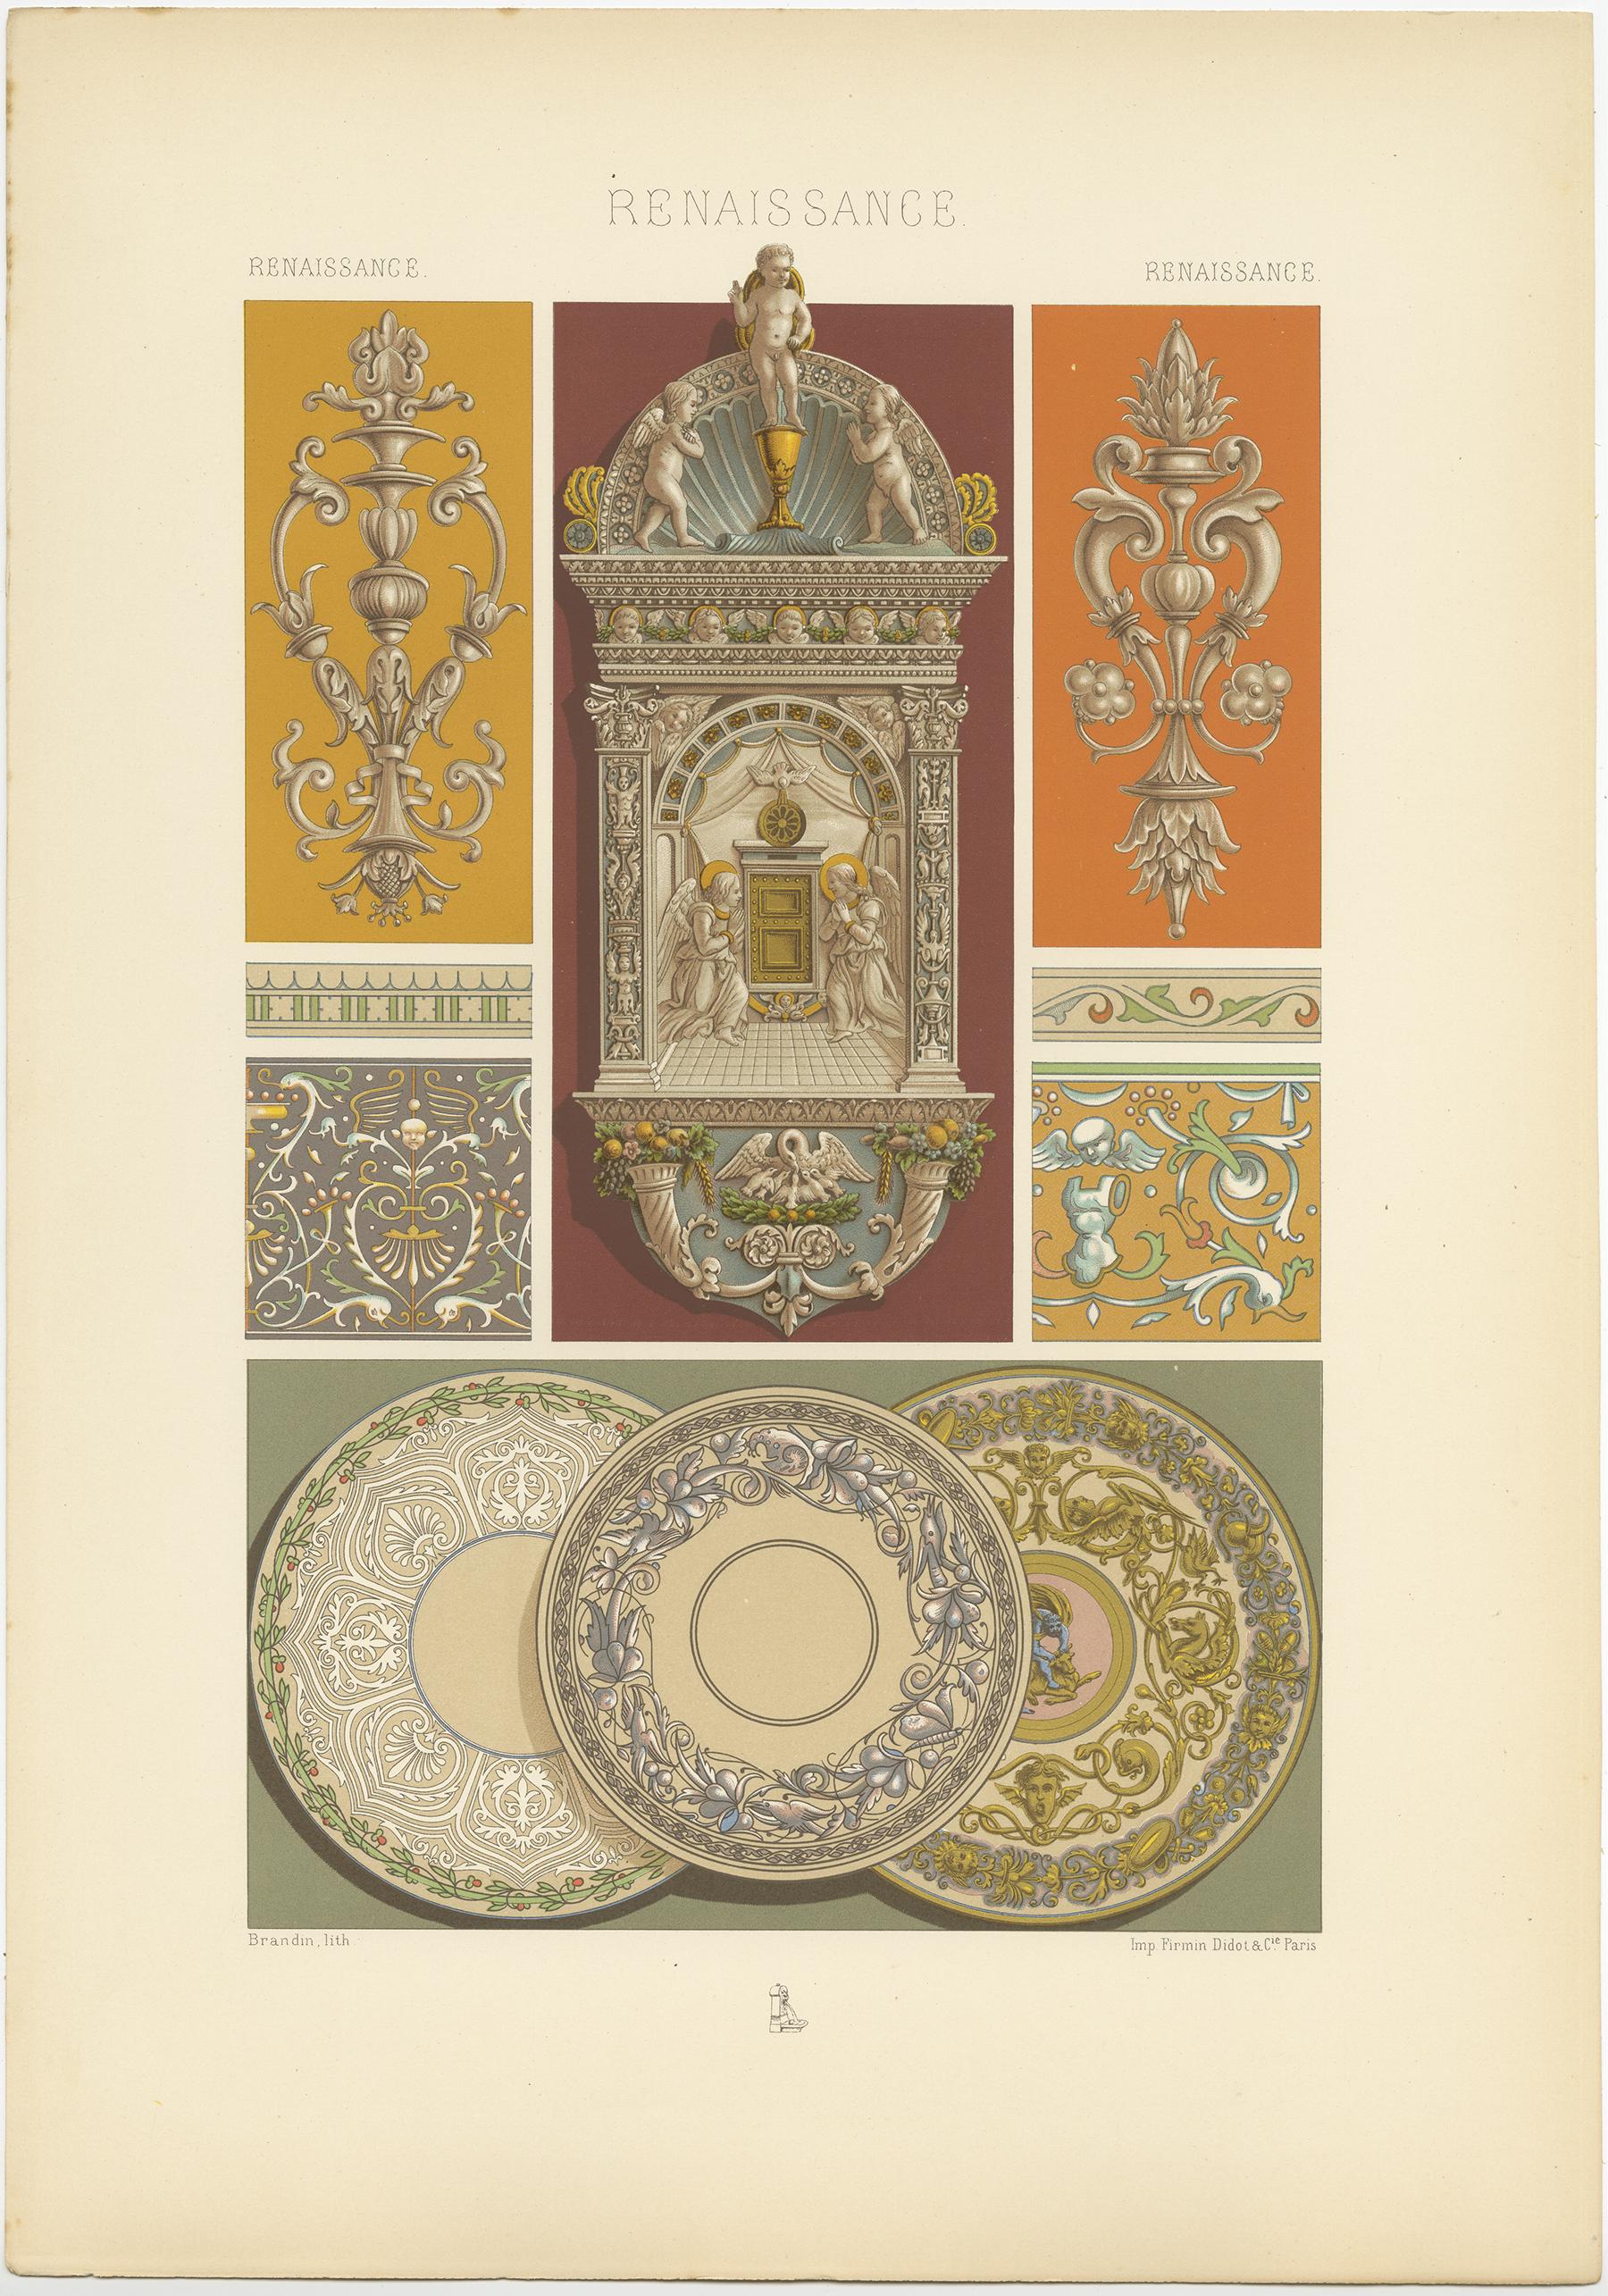 Antique print titled 'Renaissance - Renaissance - Renaissance'. Chromolithograph of ceramic and stained glass, France and Italy 15th and 16th centuries ornaments. This print originates from 'l'Ornement Polychrome' by Auguste Racinet. Published circa